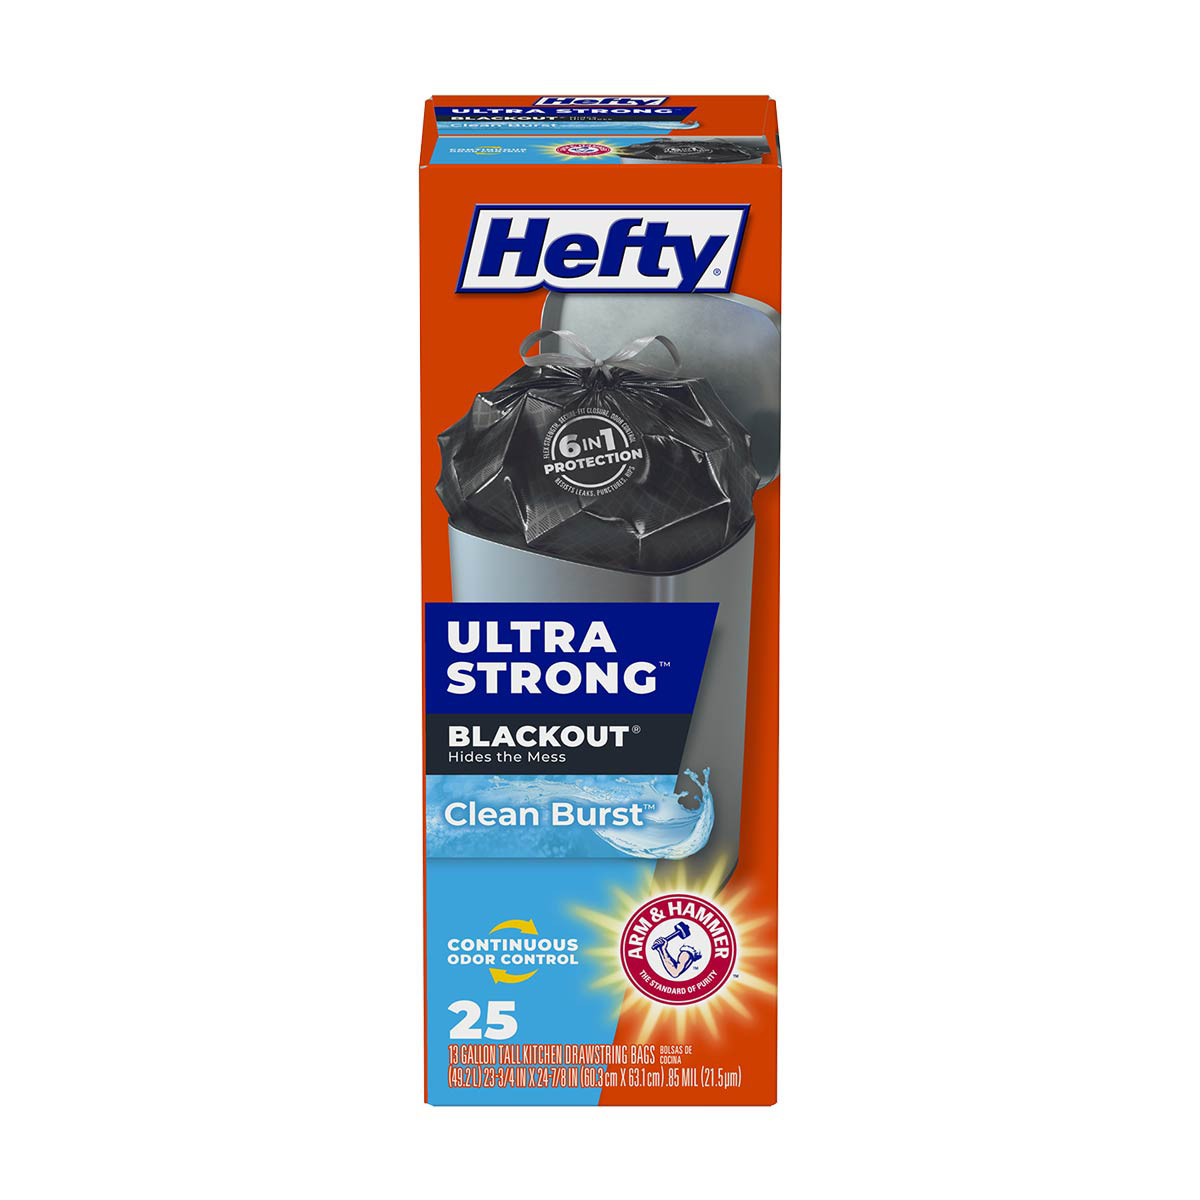 Hefty Ultra Strong Multipurpose Trash Bags, Black Large Flexible Bags with  Drawstring, White Pine Breeze Scent, 30 Gallon Bags, 25 CT Bags Per Pack